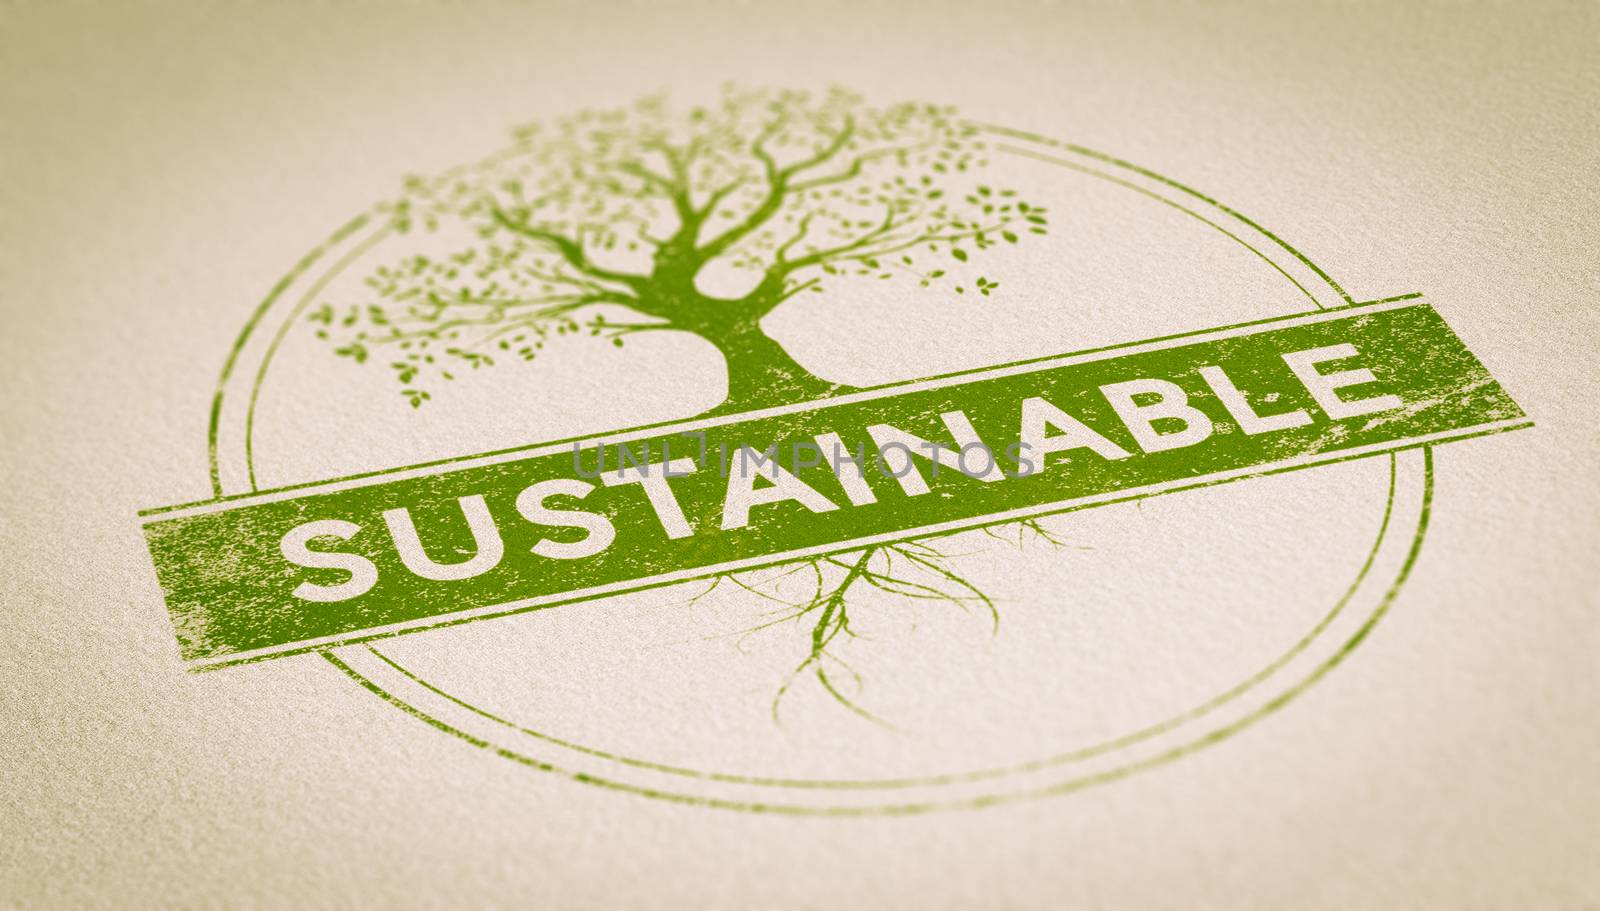 Green rubber stamp imprint on a sheet of paper composed of a tree and the word sustainable inside a circle with depth of field effect. Concept image for illustration of sustainability and environment.